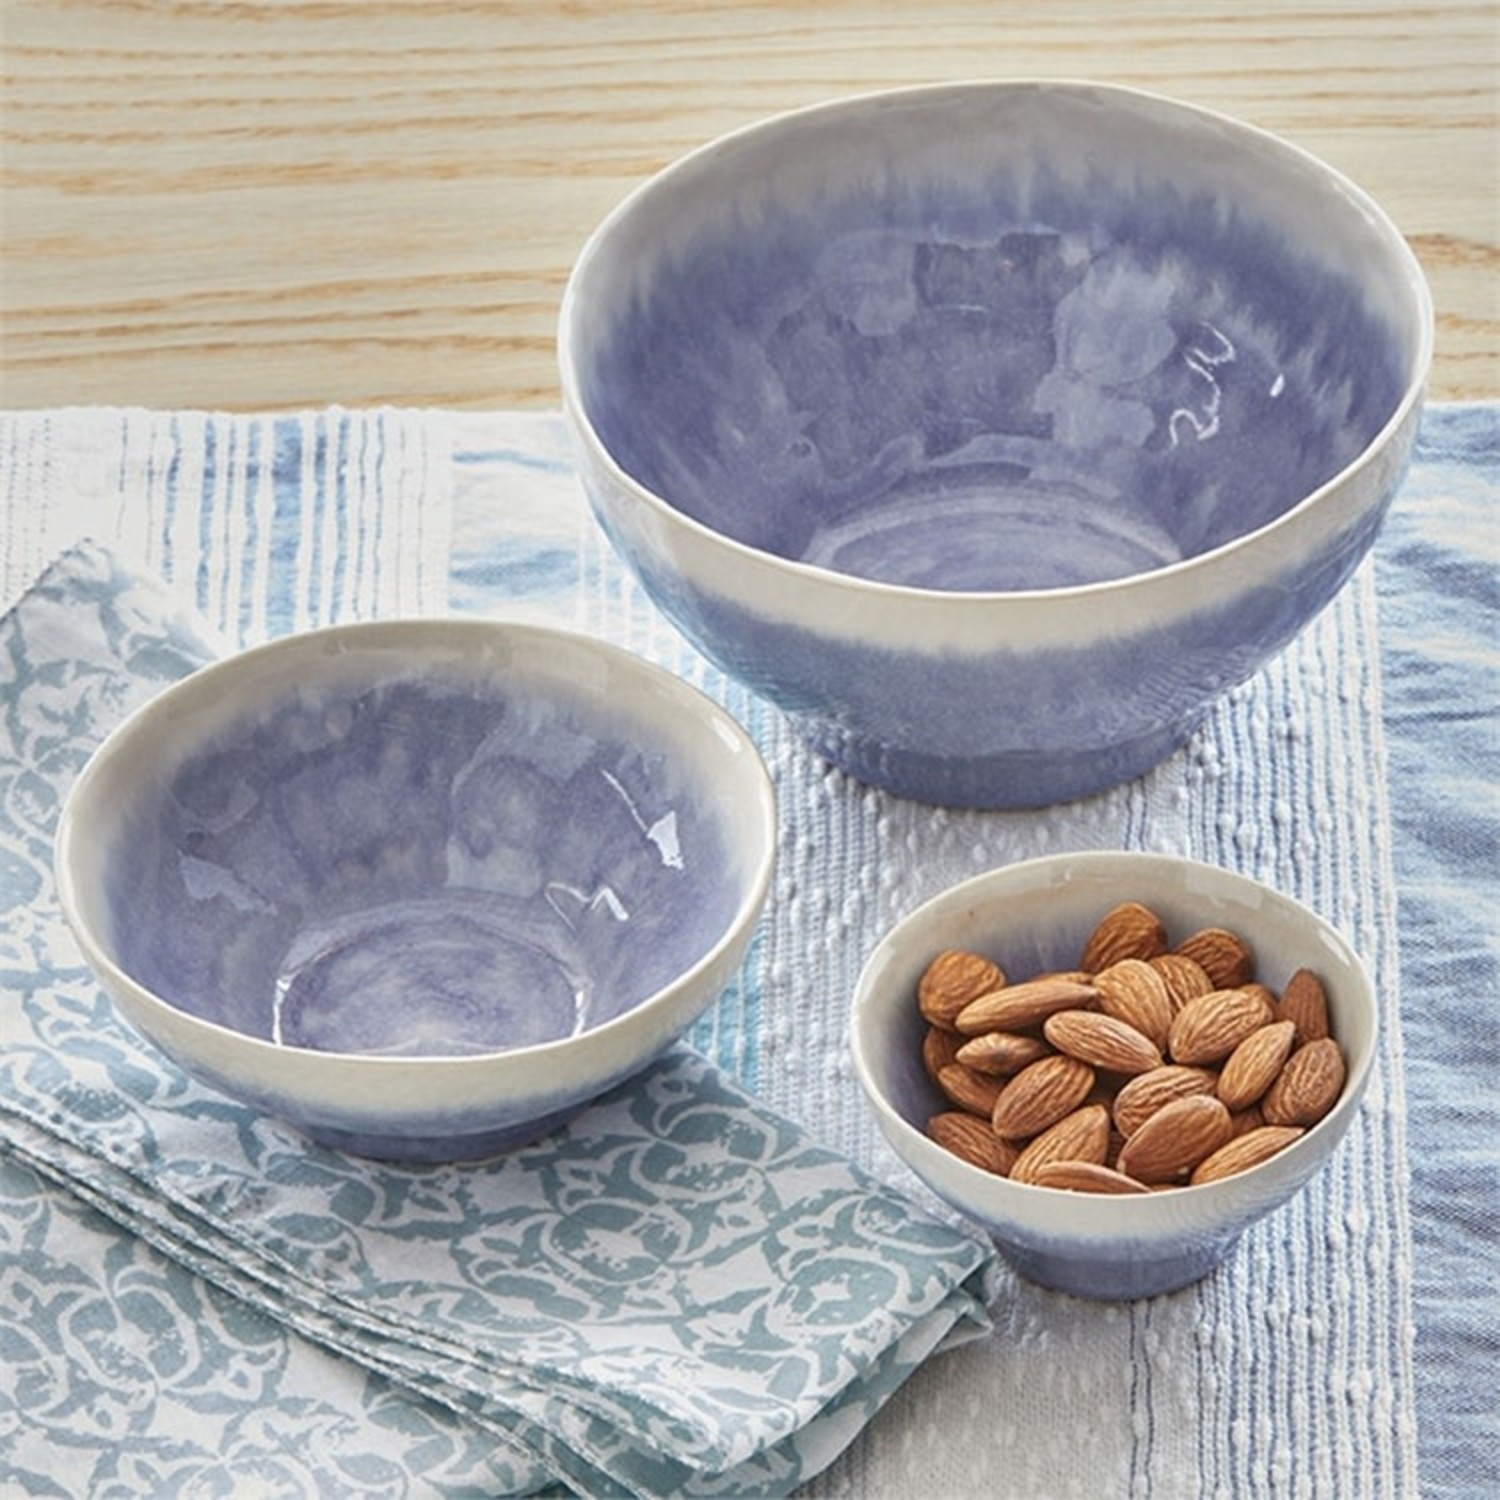 Ceramic Serving Bowl With Lid, Many Gazes